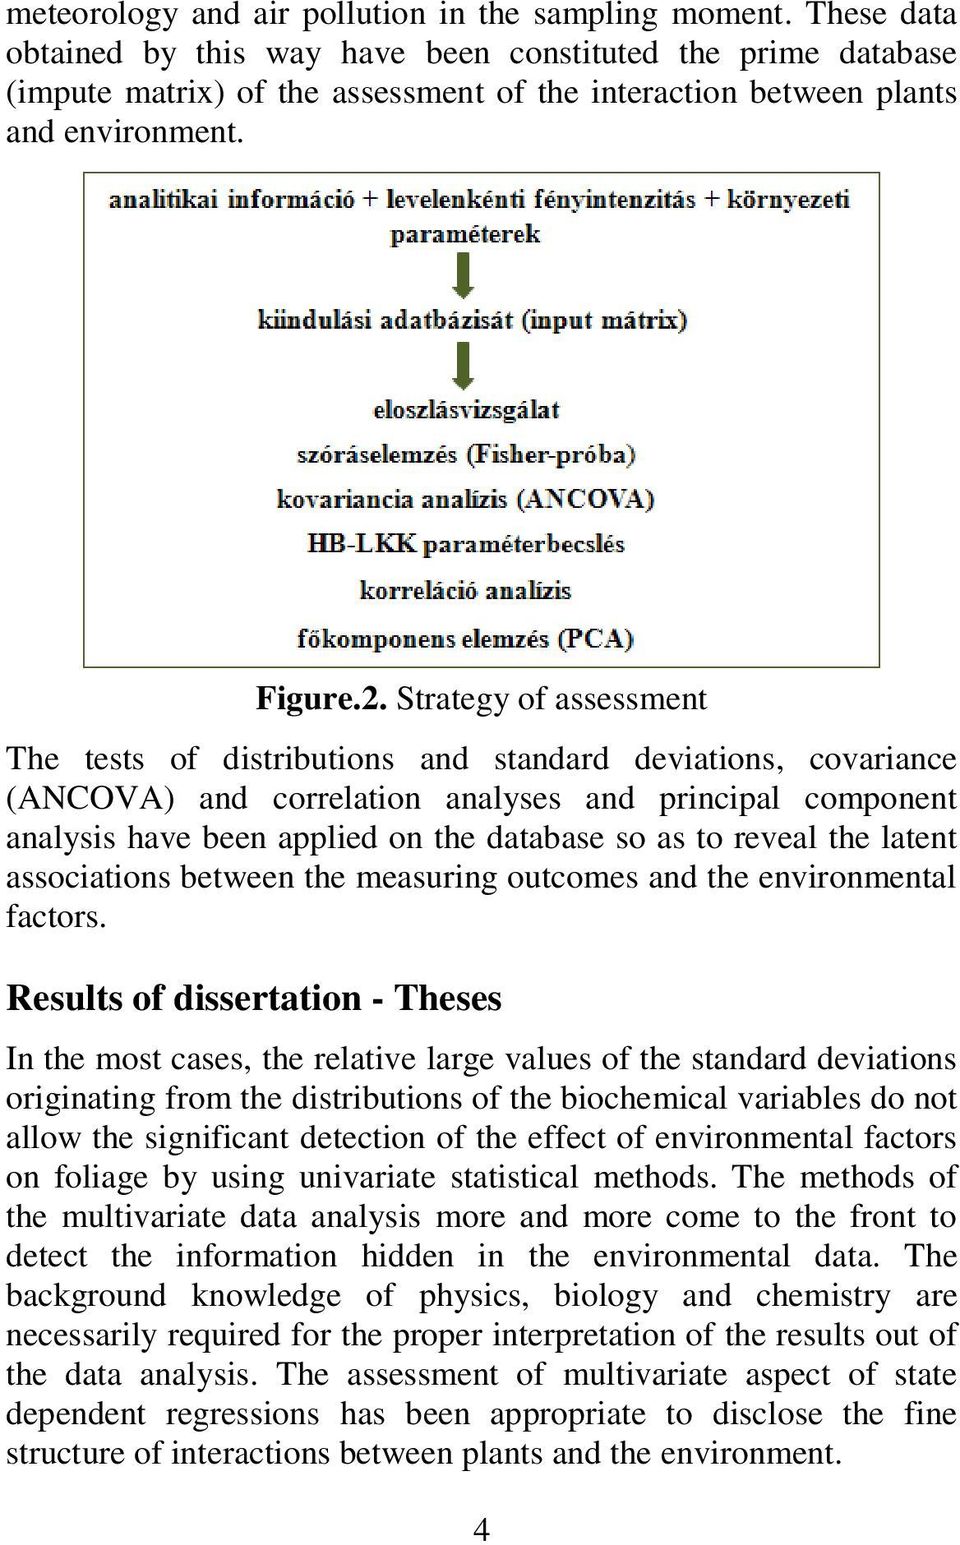 Strategy of assessment The tests of distributions and standard deviations, covariance (ANCOVA) and correlation analyses and principal component analysis have been applied on the database so as to